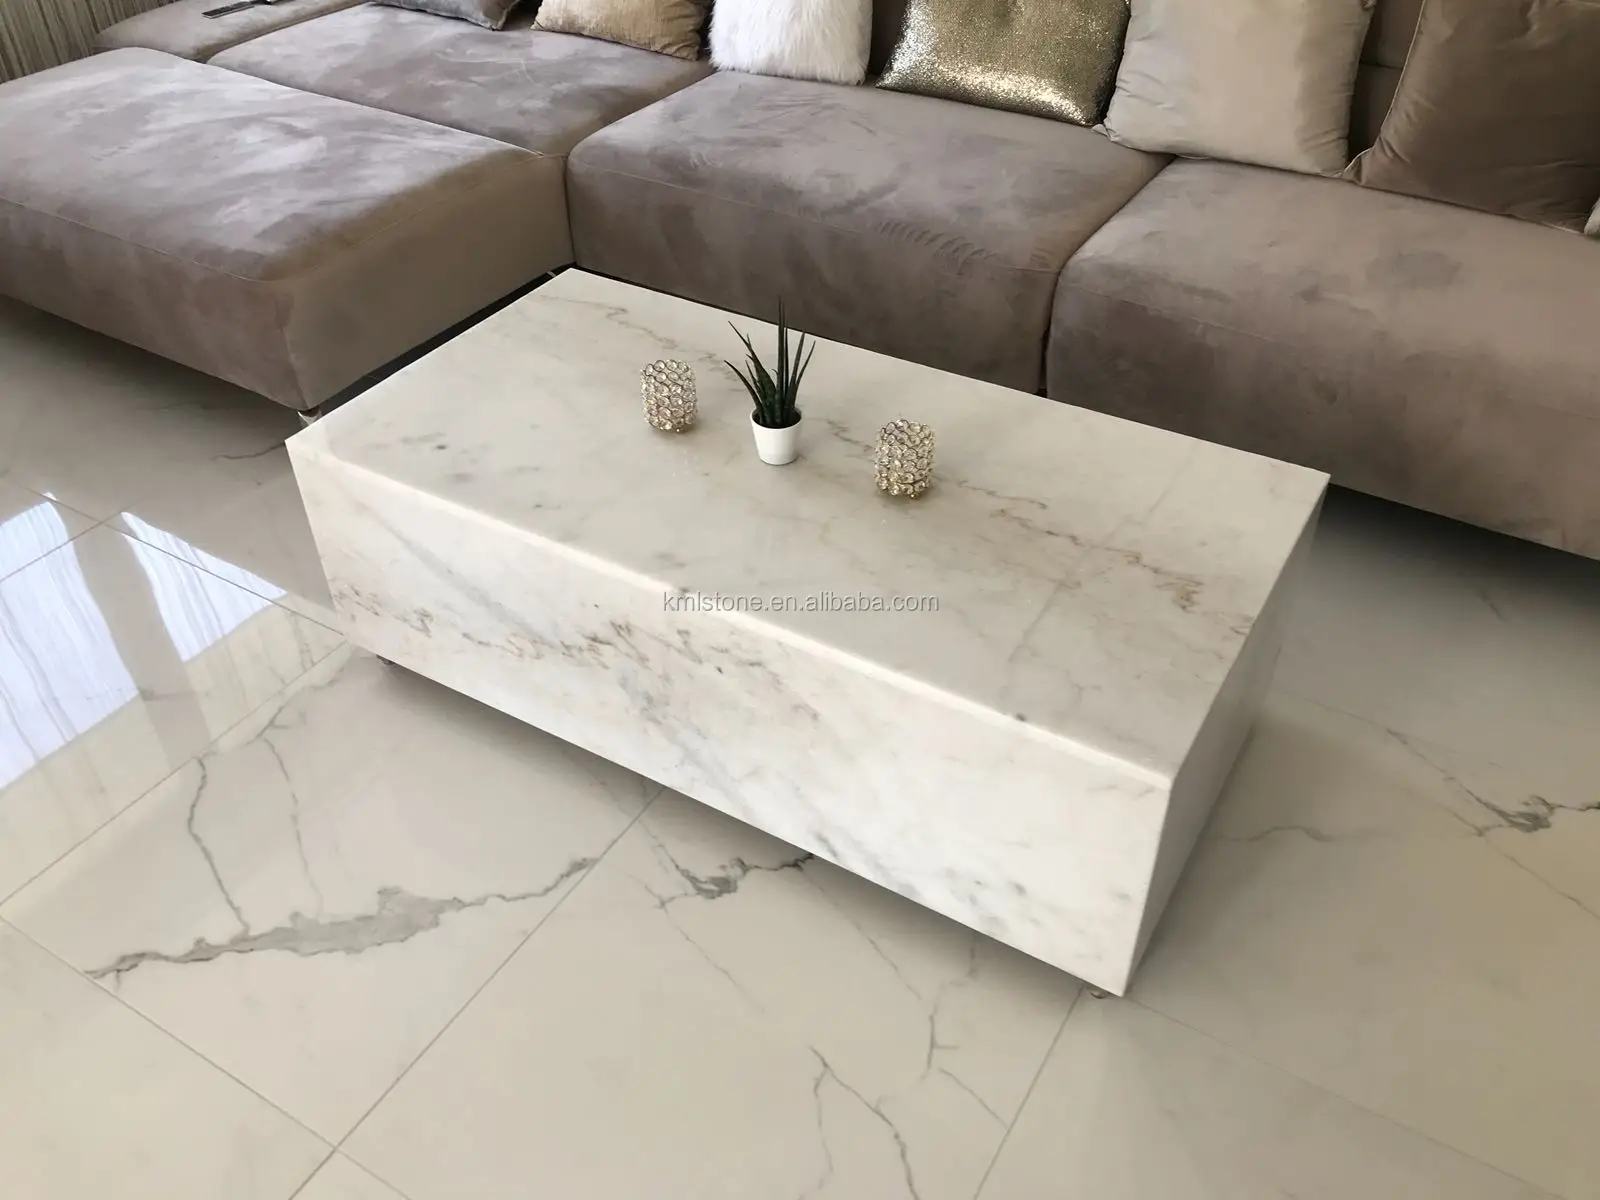 Living Room Furniture Design White Marble Table Buy Marble Table